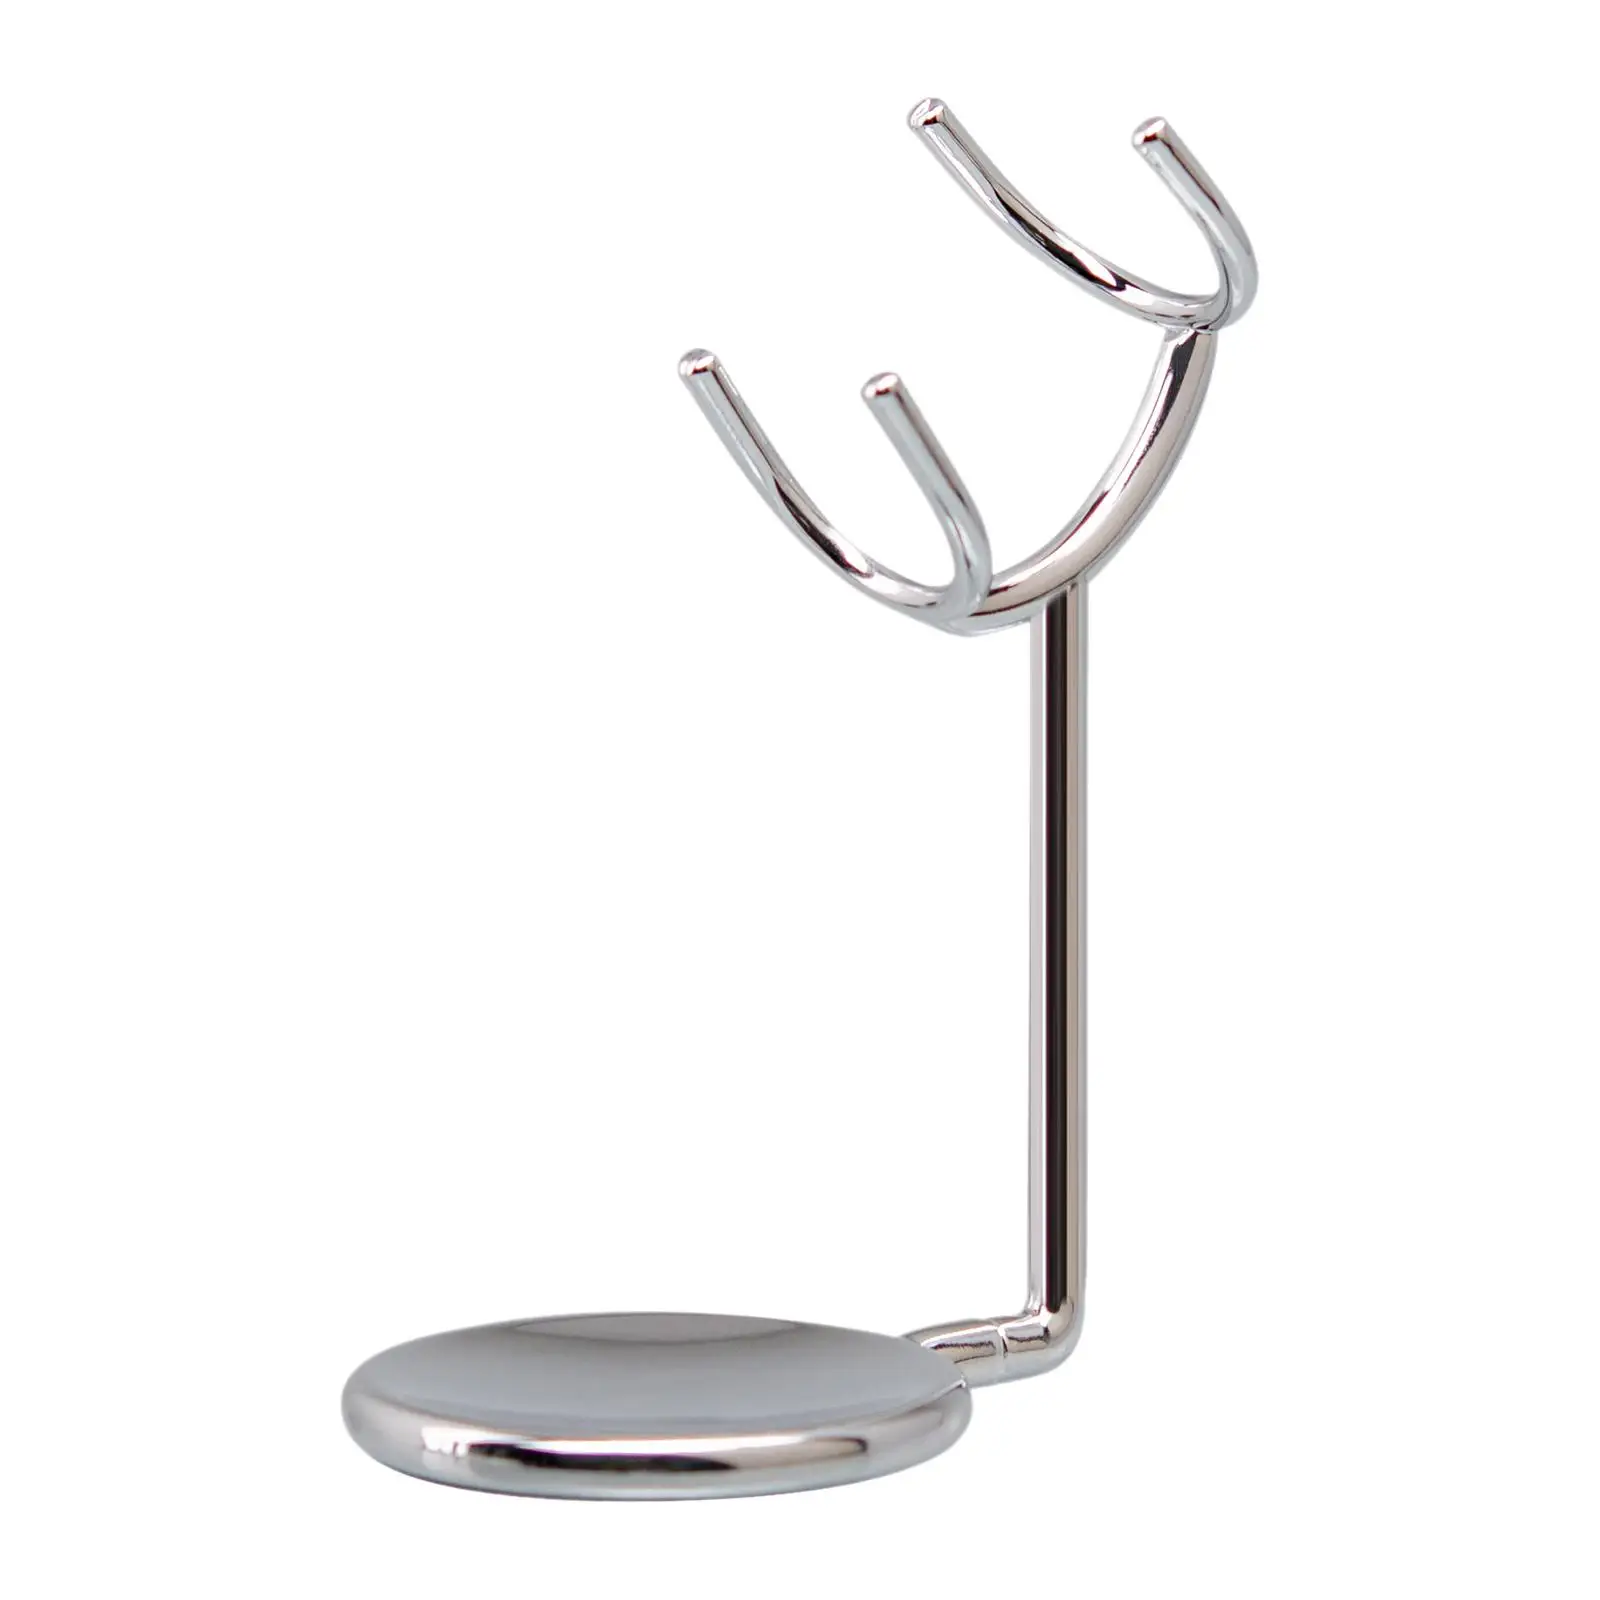 Manual Shaver Holder Bathroom Accessories Wide Openings Modern Rack Gifts Weighted Base Storage Organization Shaver Hanger Alloy